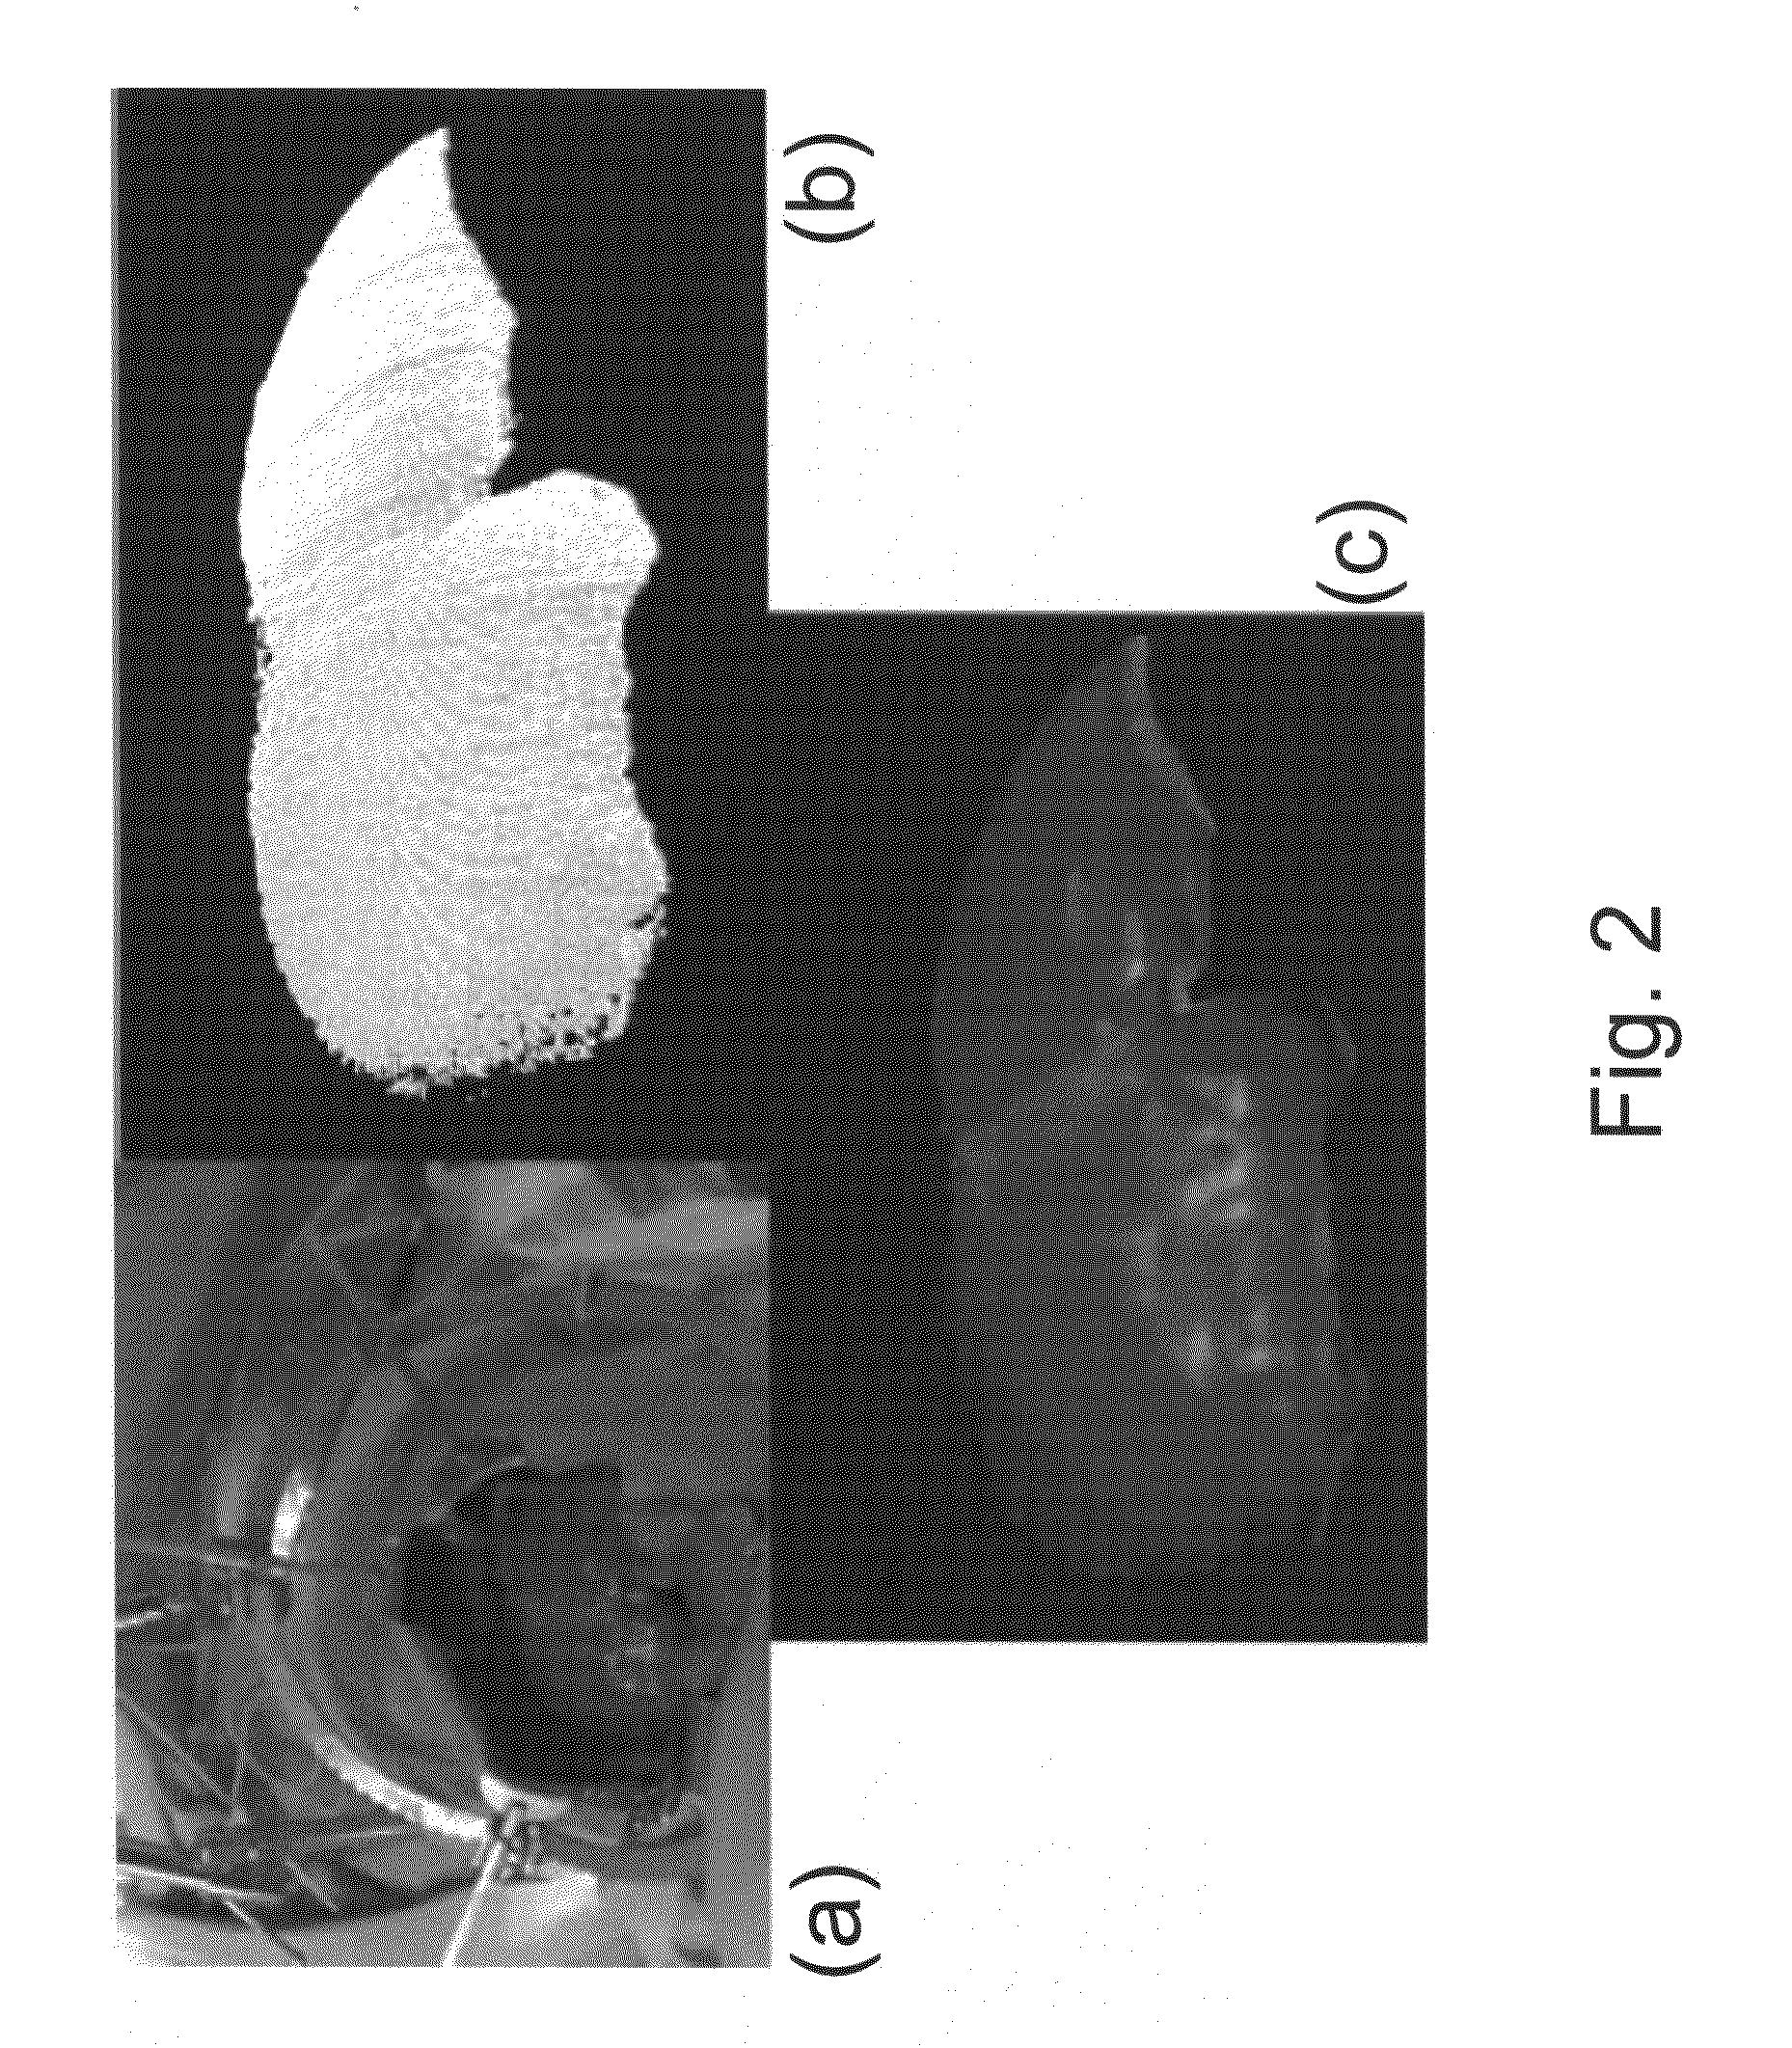 Apparatus and methods of compensating for organ deformation, registration of internal structures to images, and applications of same